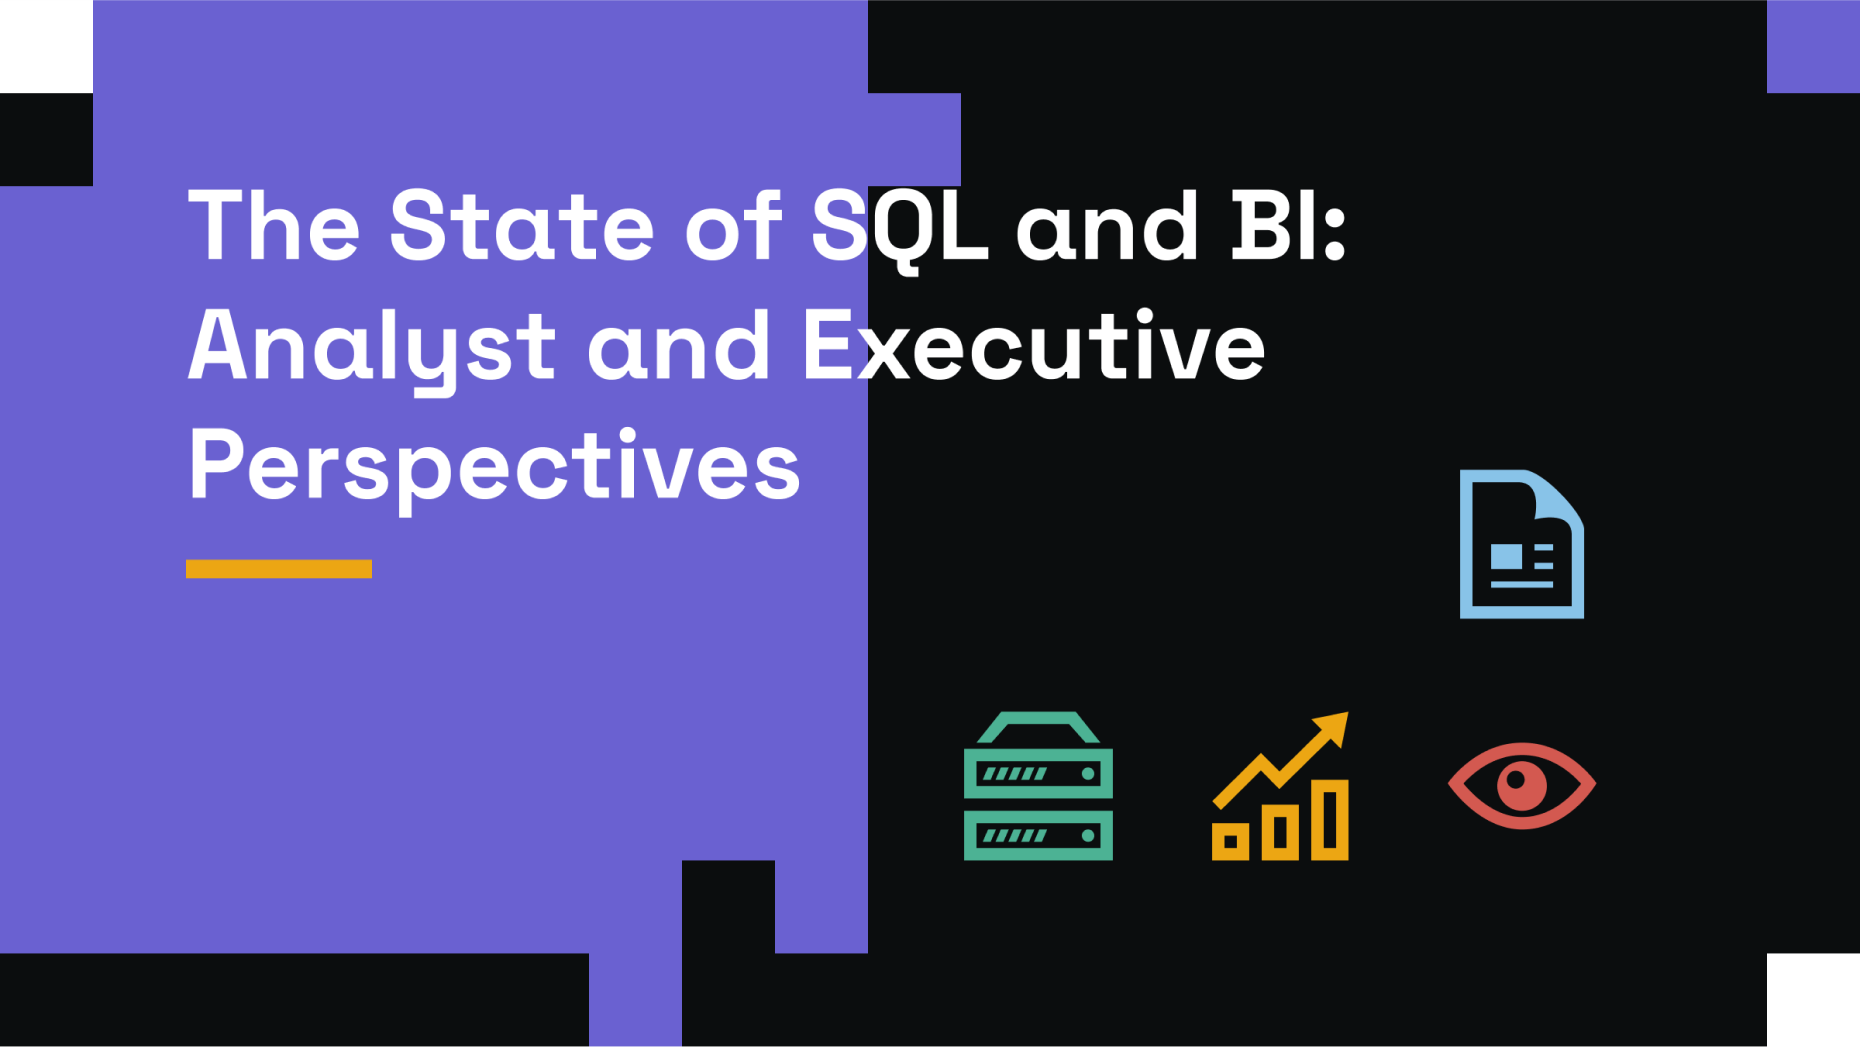 The State of SQL and BI: Analyst and Executive Perspectives